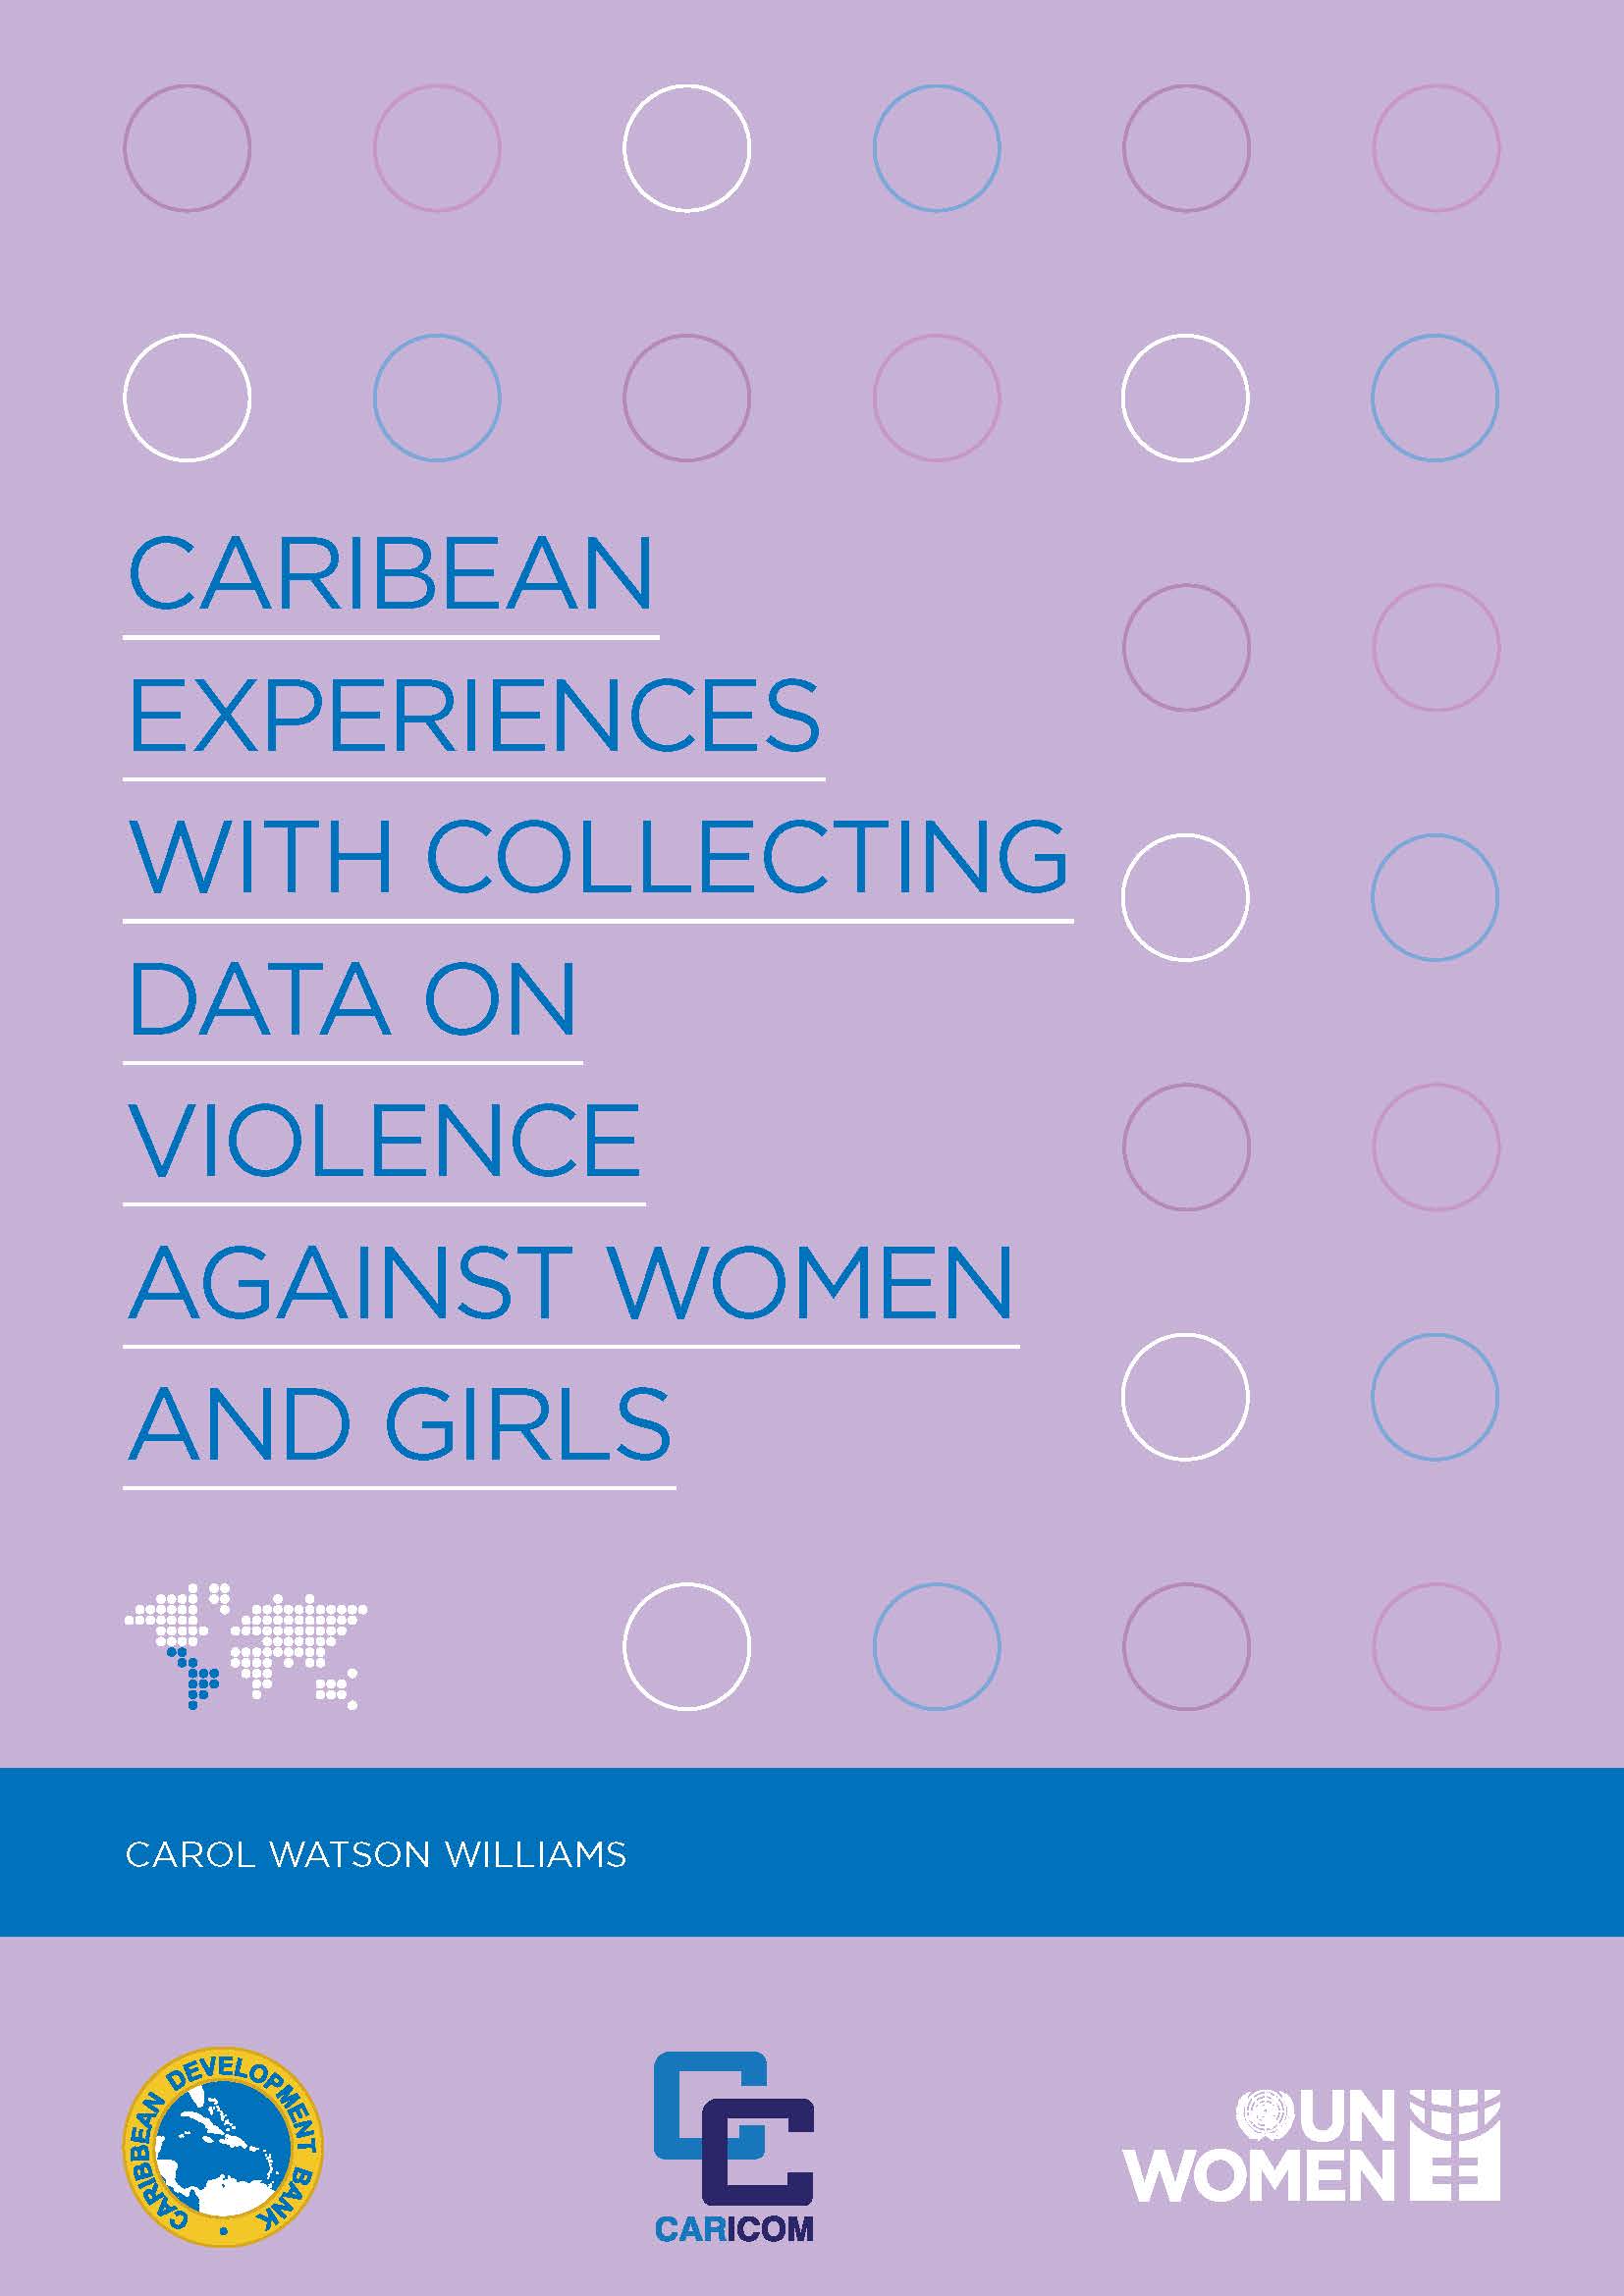 text based cover against lavender background with CDB, UN Women and CARICOM logos at the bottom